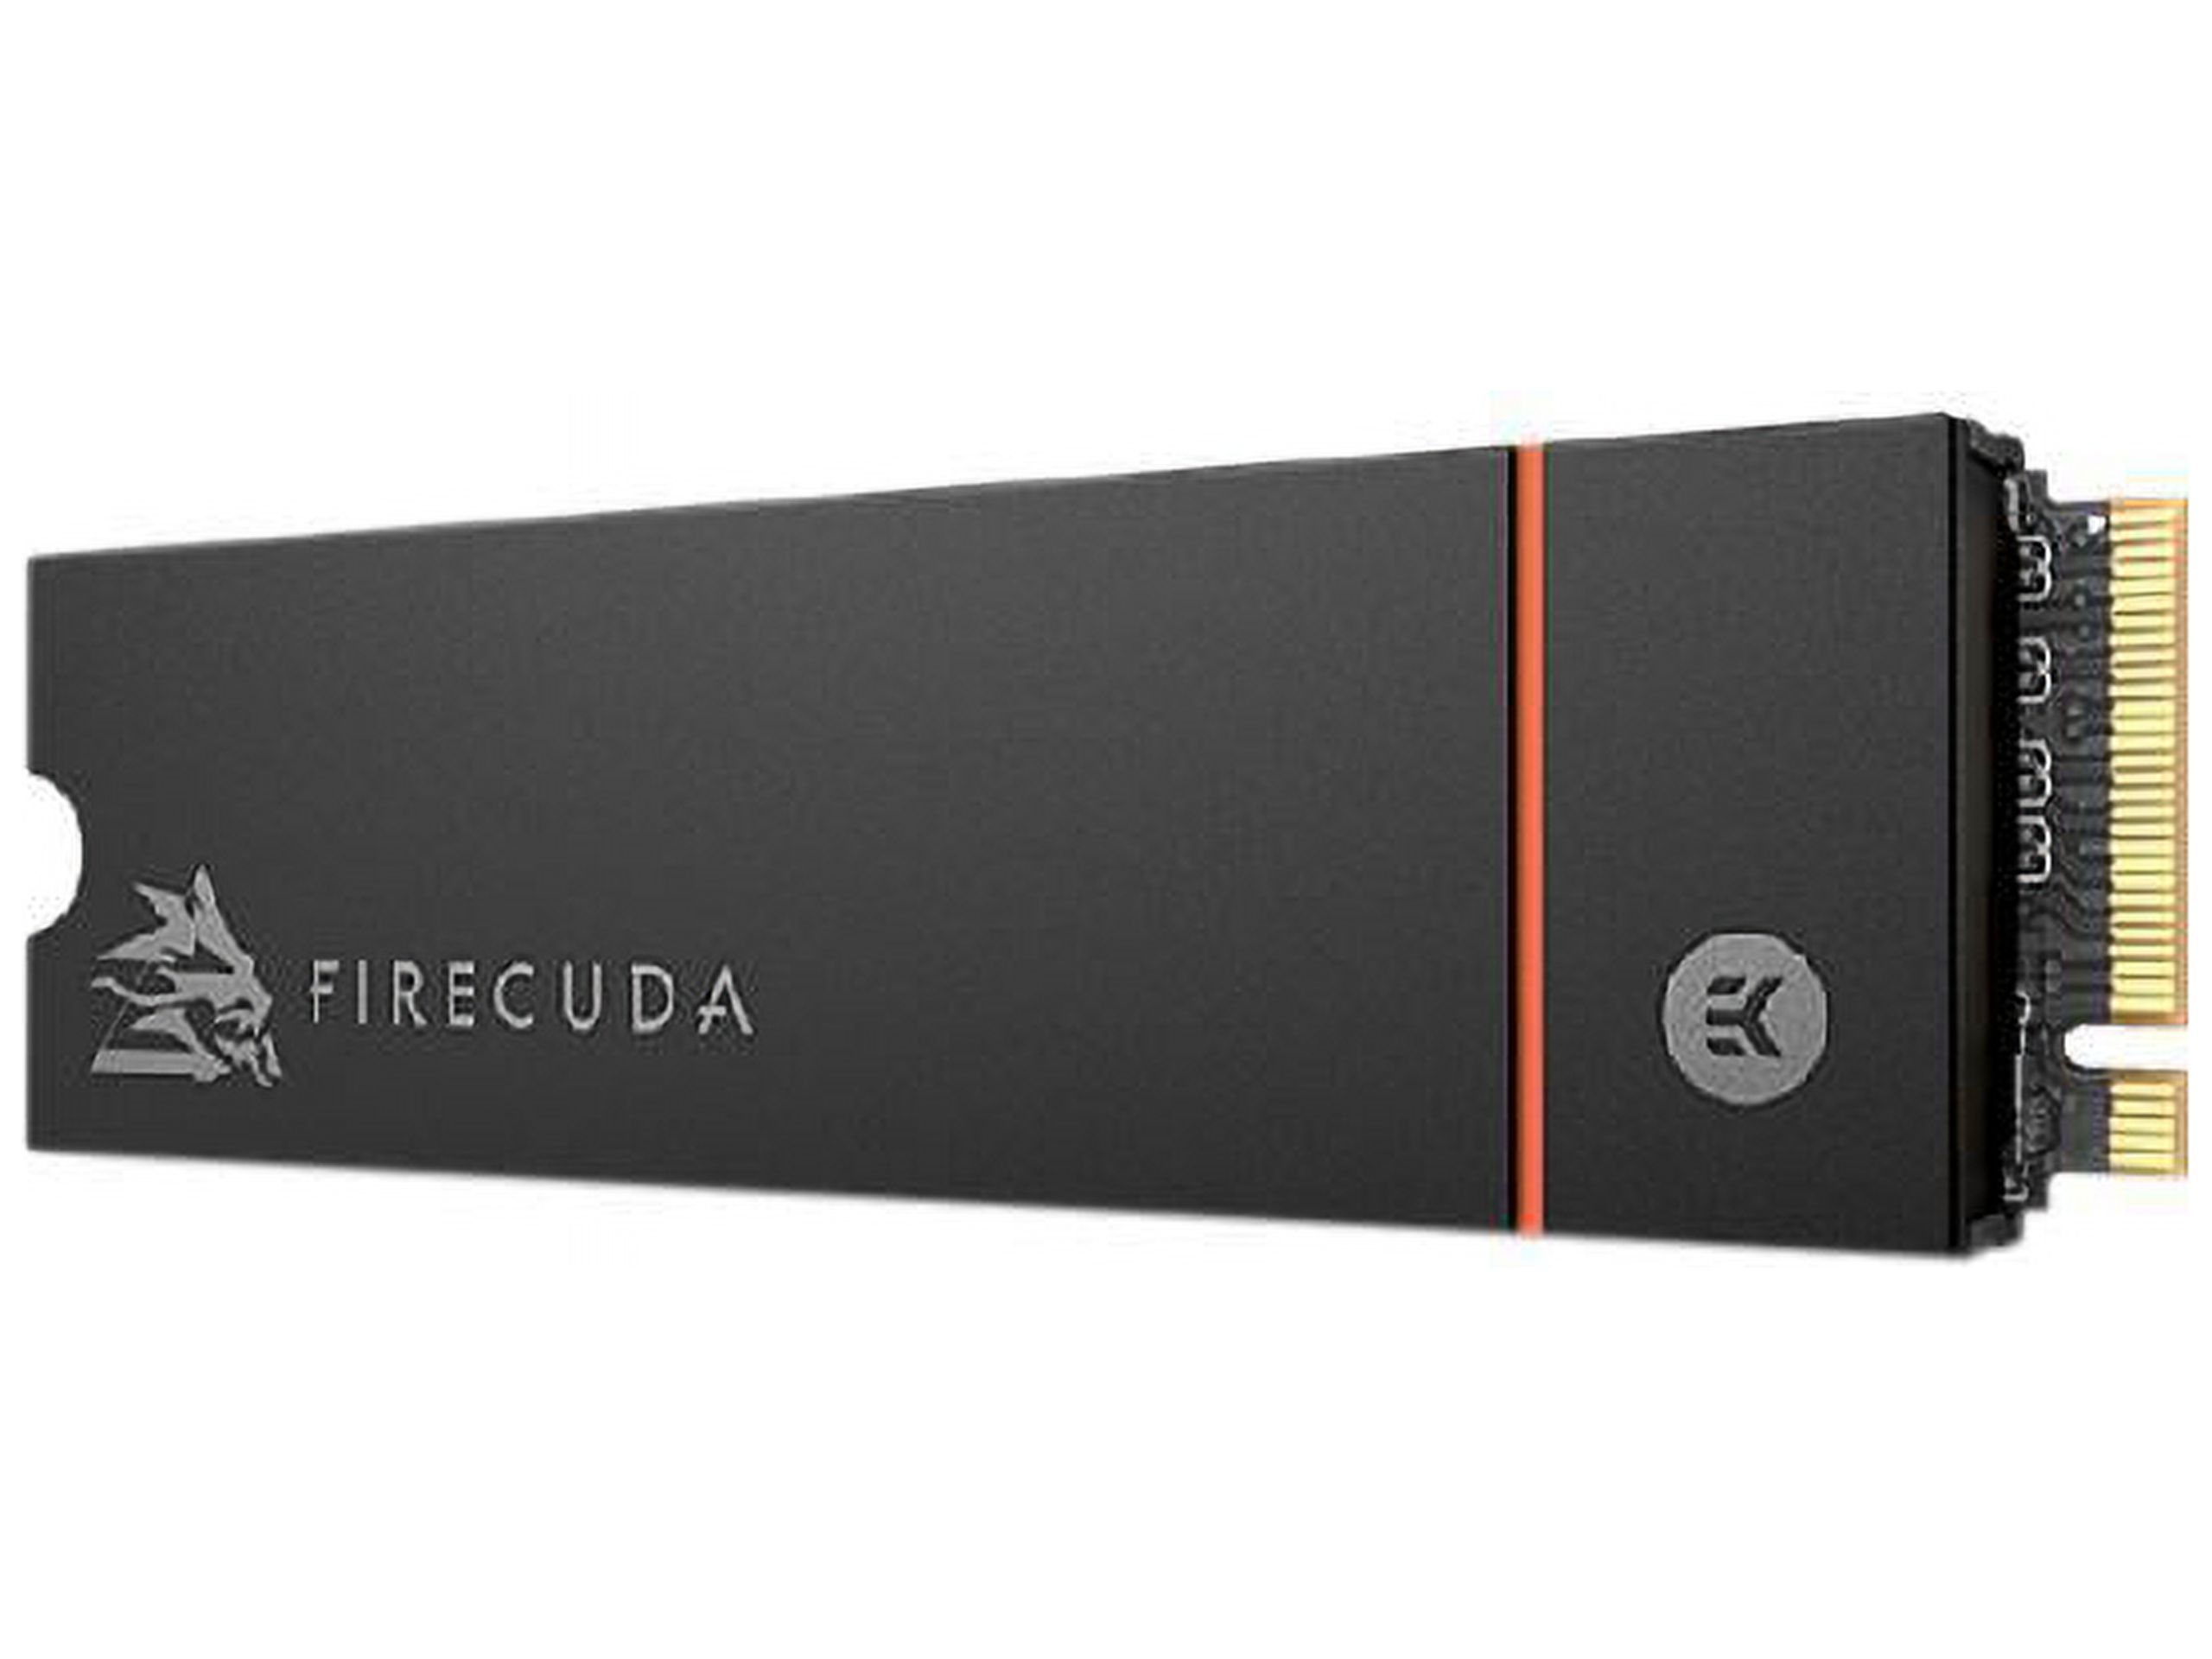 Seagate FireCuda 530 M.2 2280 4TB PCIe Gen4 x4 NVMe 1.4 3D NAND Internal Solid State Drive (SSD) ZP4000GM3A023 - image 3 of 6